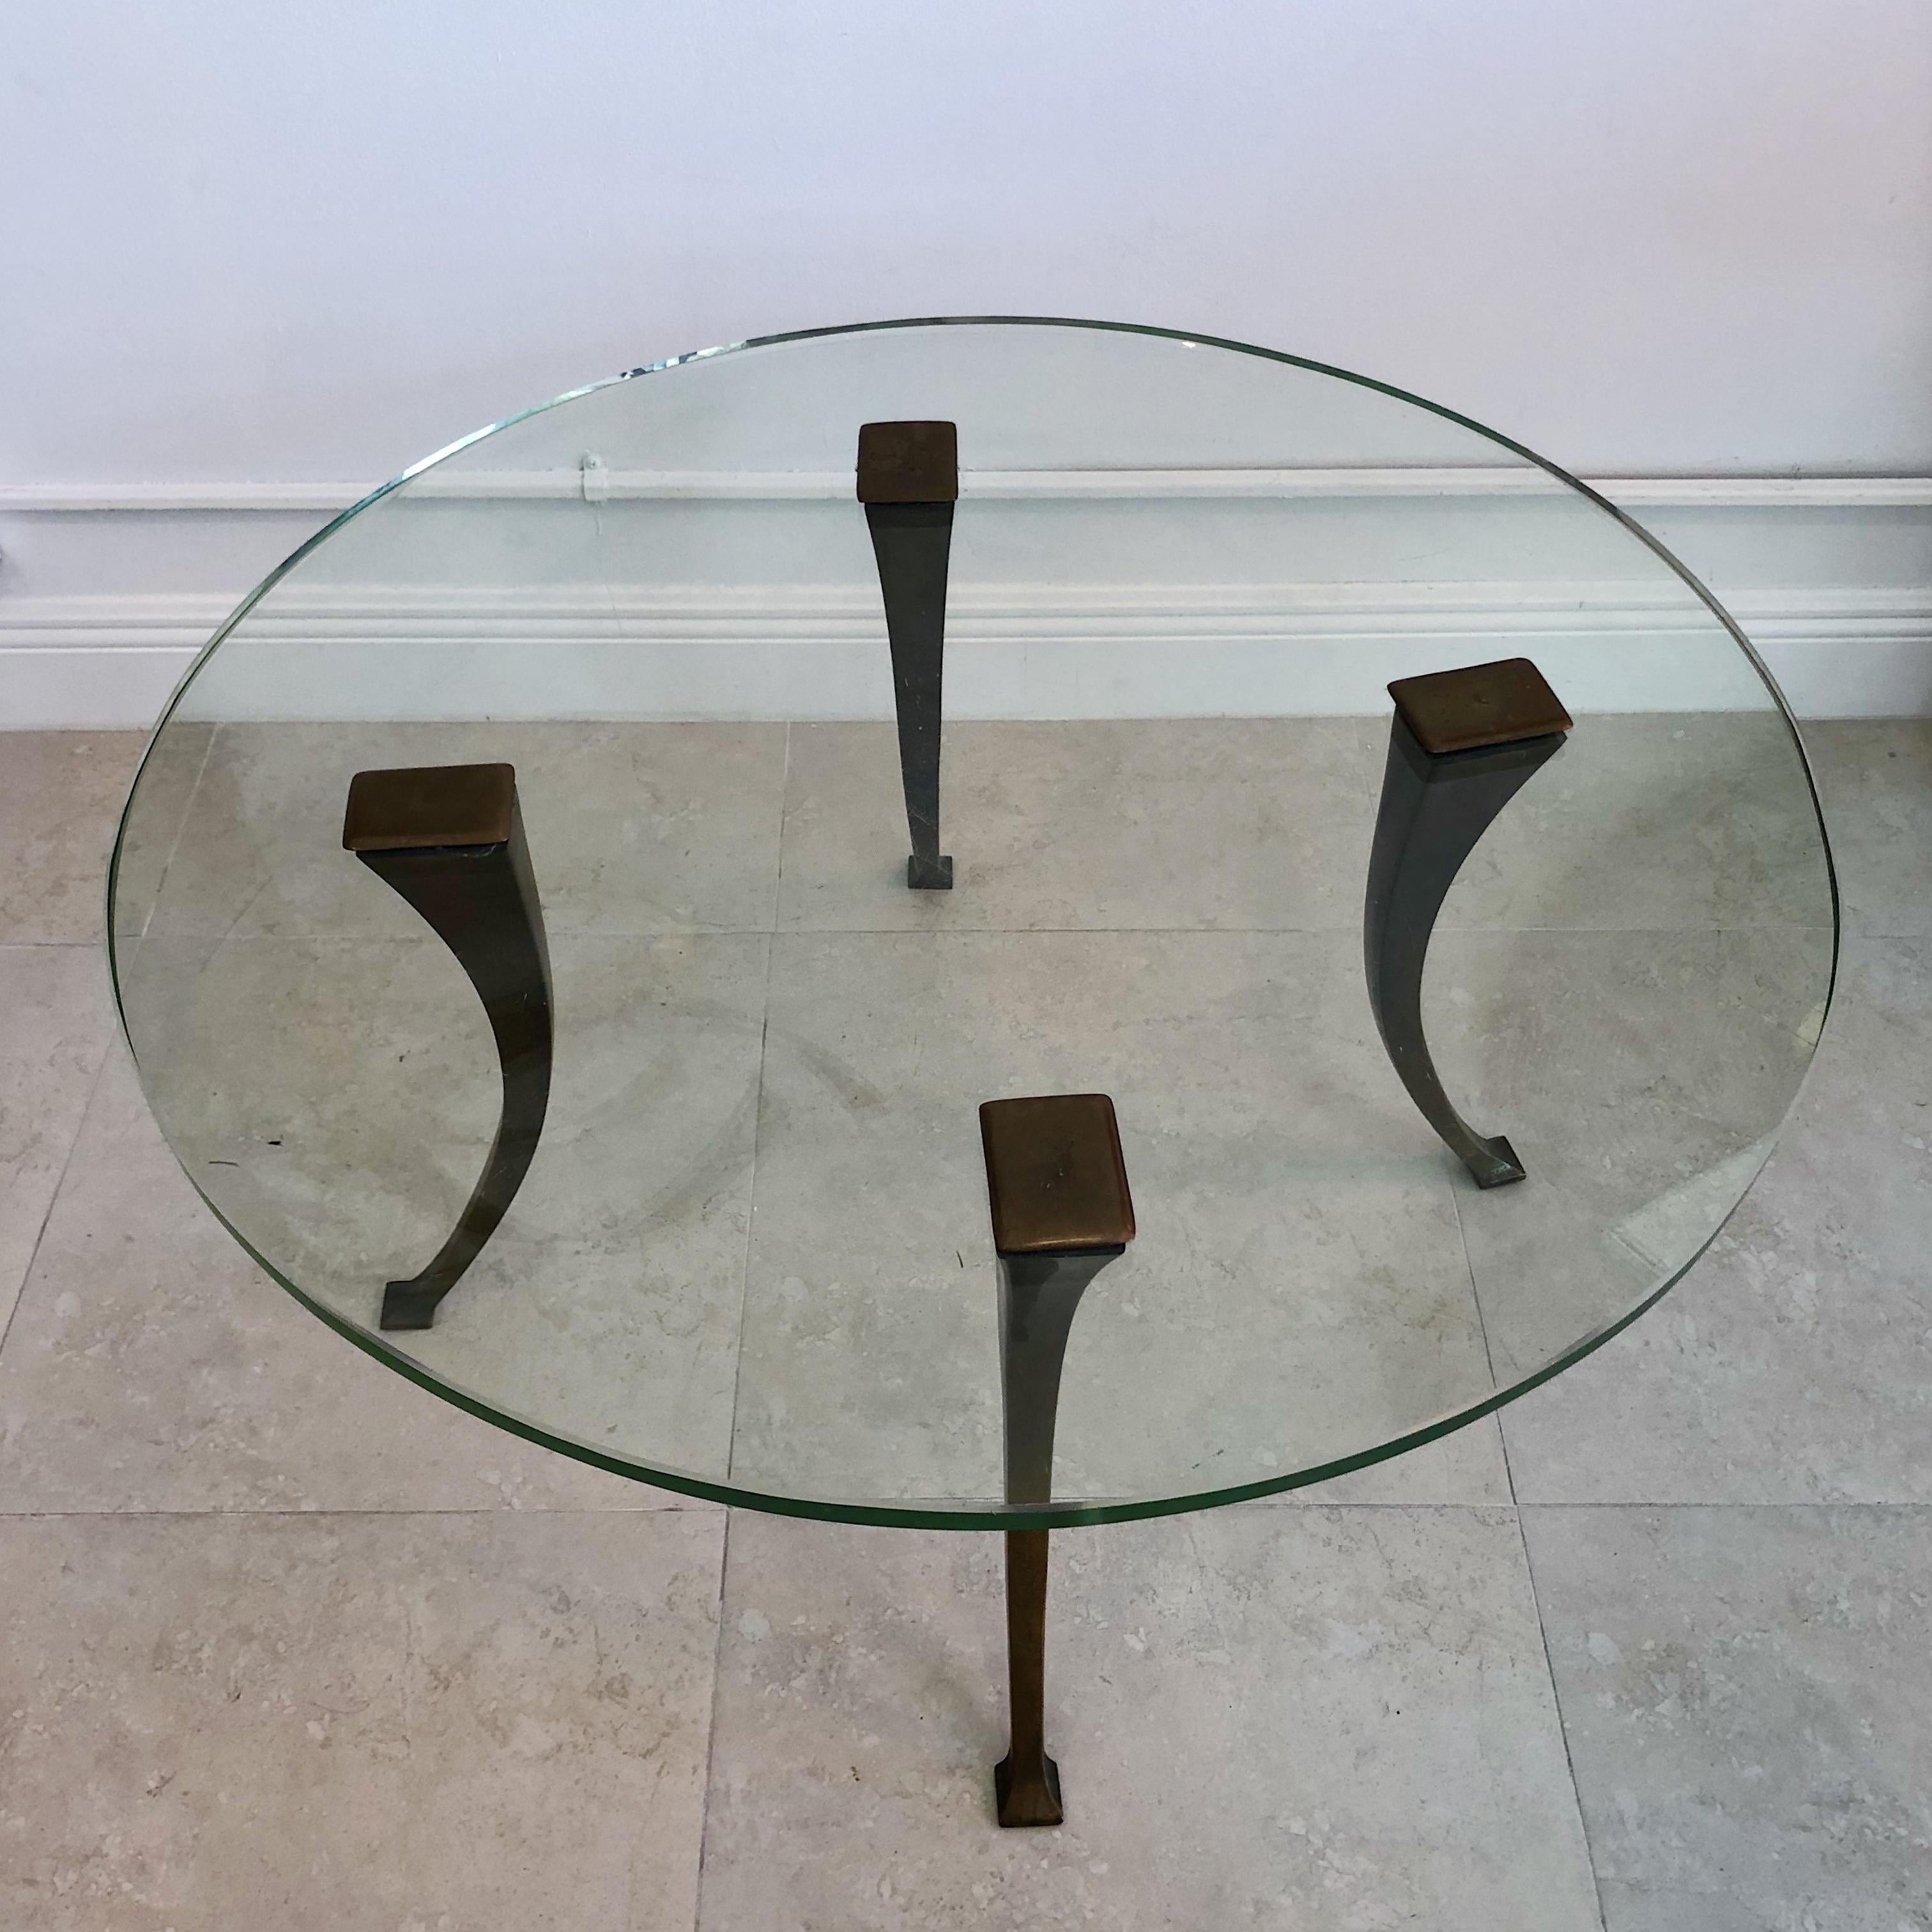 This is an exceptional coffee table that is sure to add a touch of elegance and sophistication to any living space. The table features four patinated bronze legs that have a beautiful, natural patina. The original 1940s glass top is the centerpiece